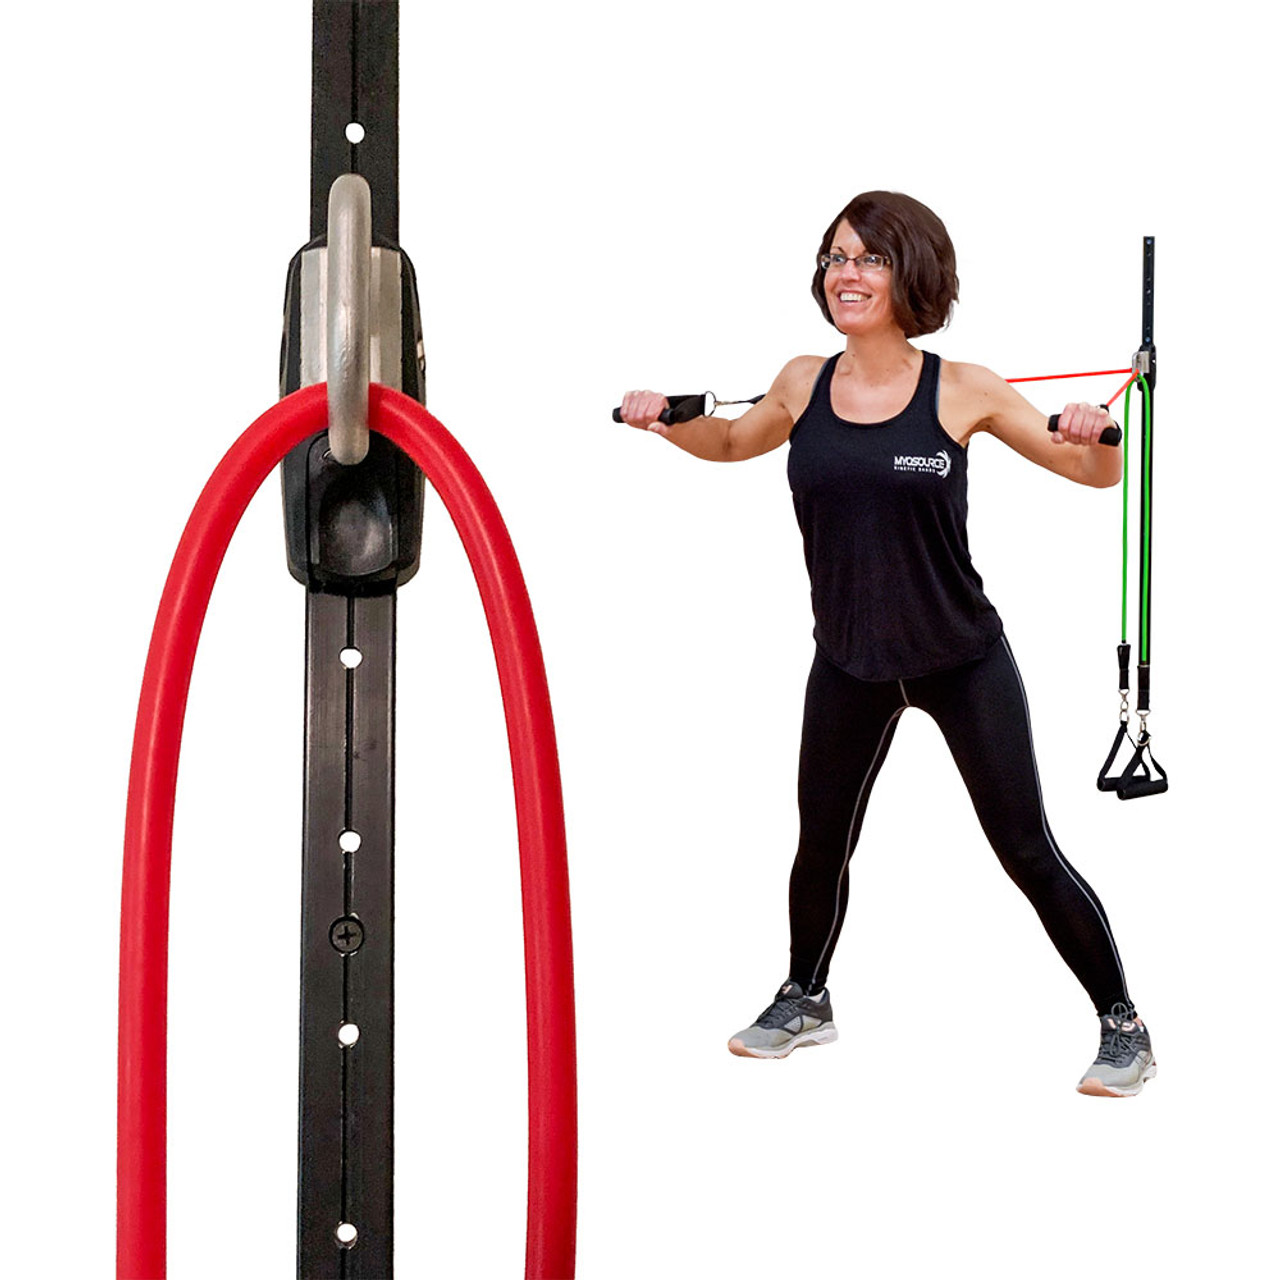 Necklet Wiskundige opleiding Space Saver Gym - Resistance Band Wall Anchor (1 Rail + 1 Rail Car)